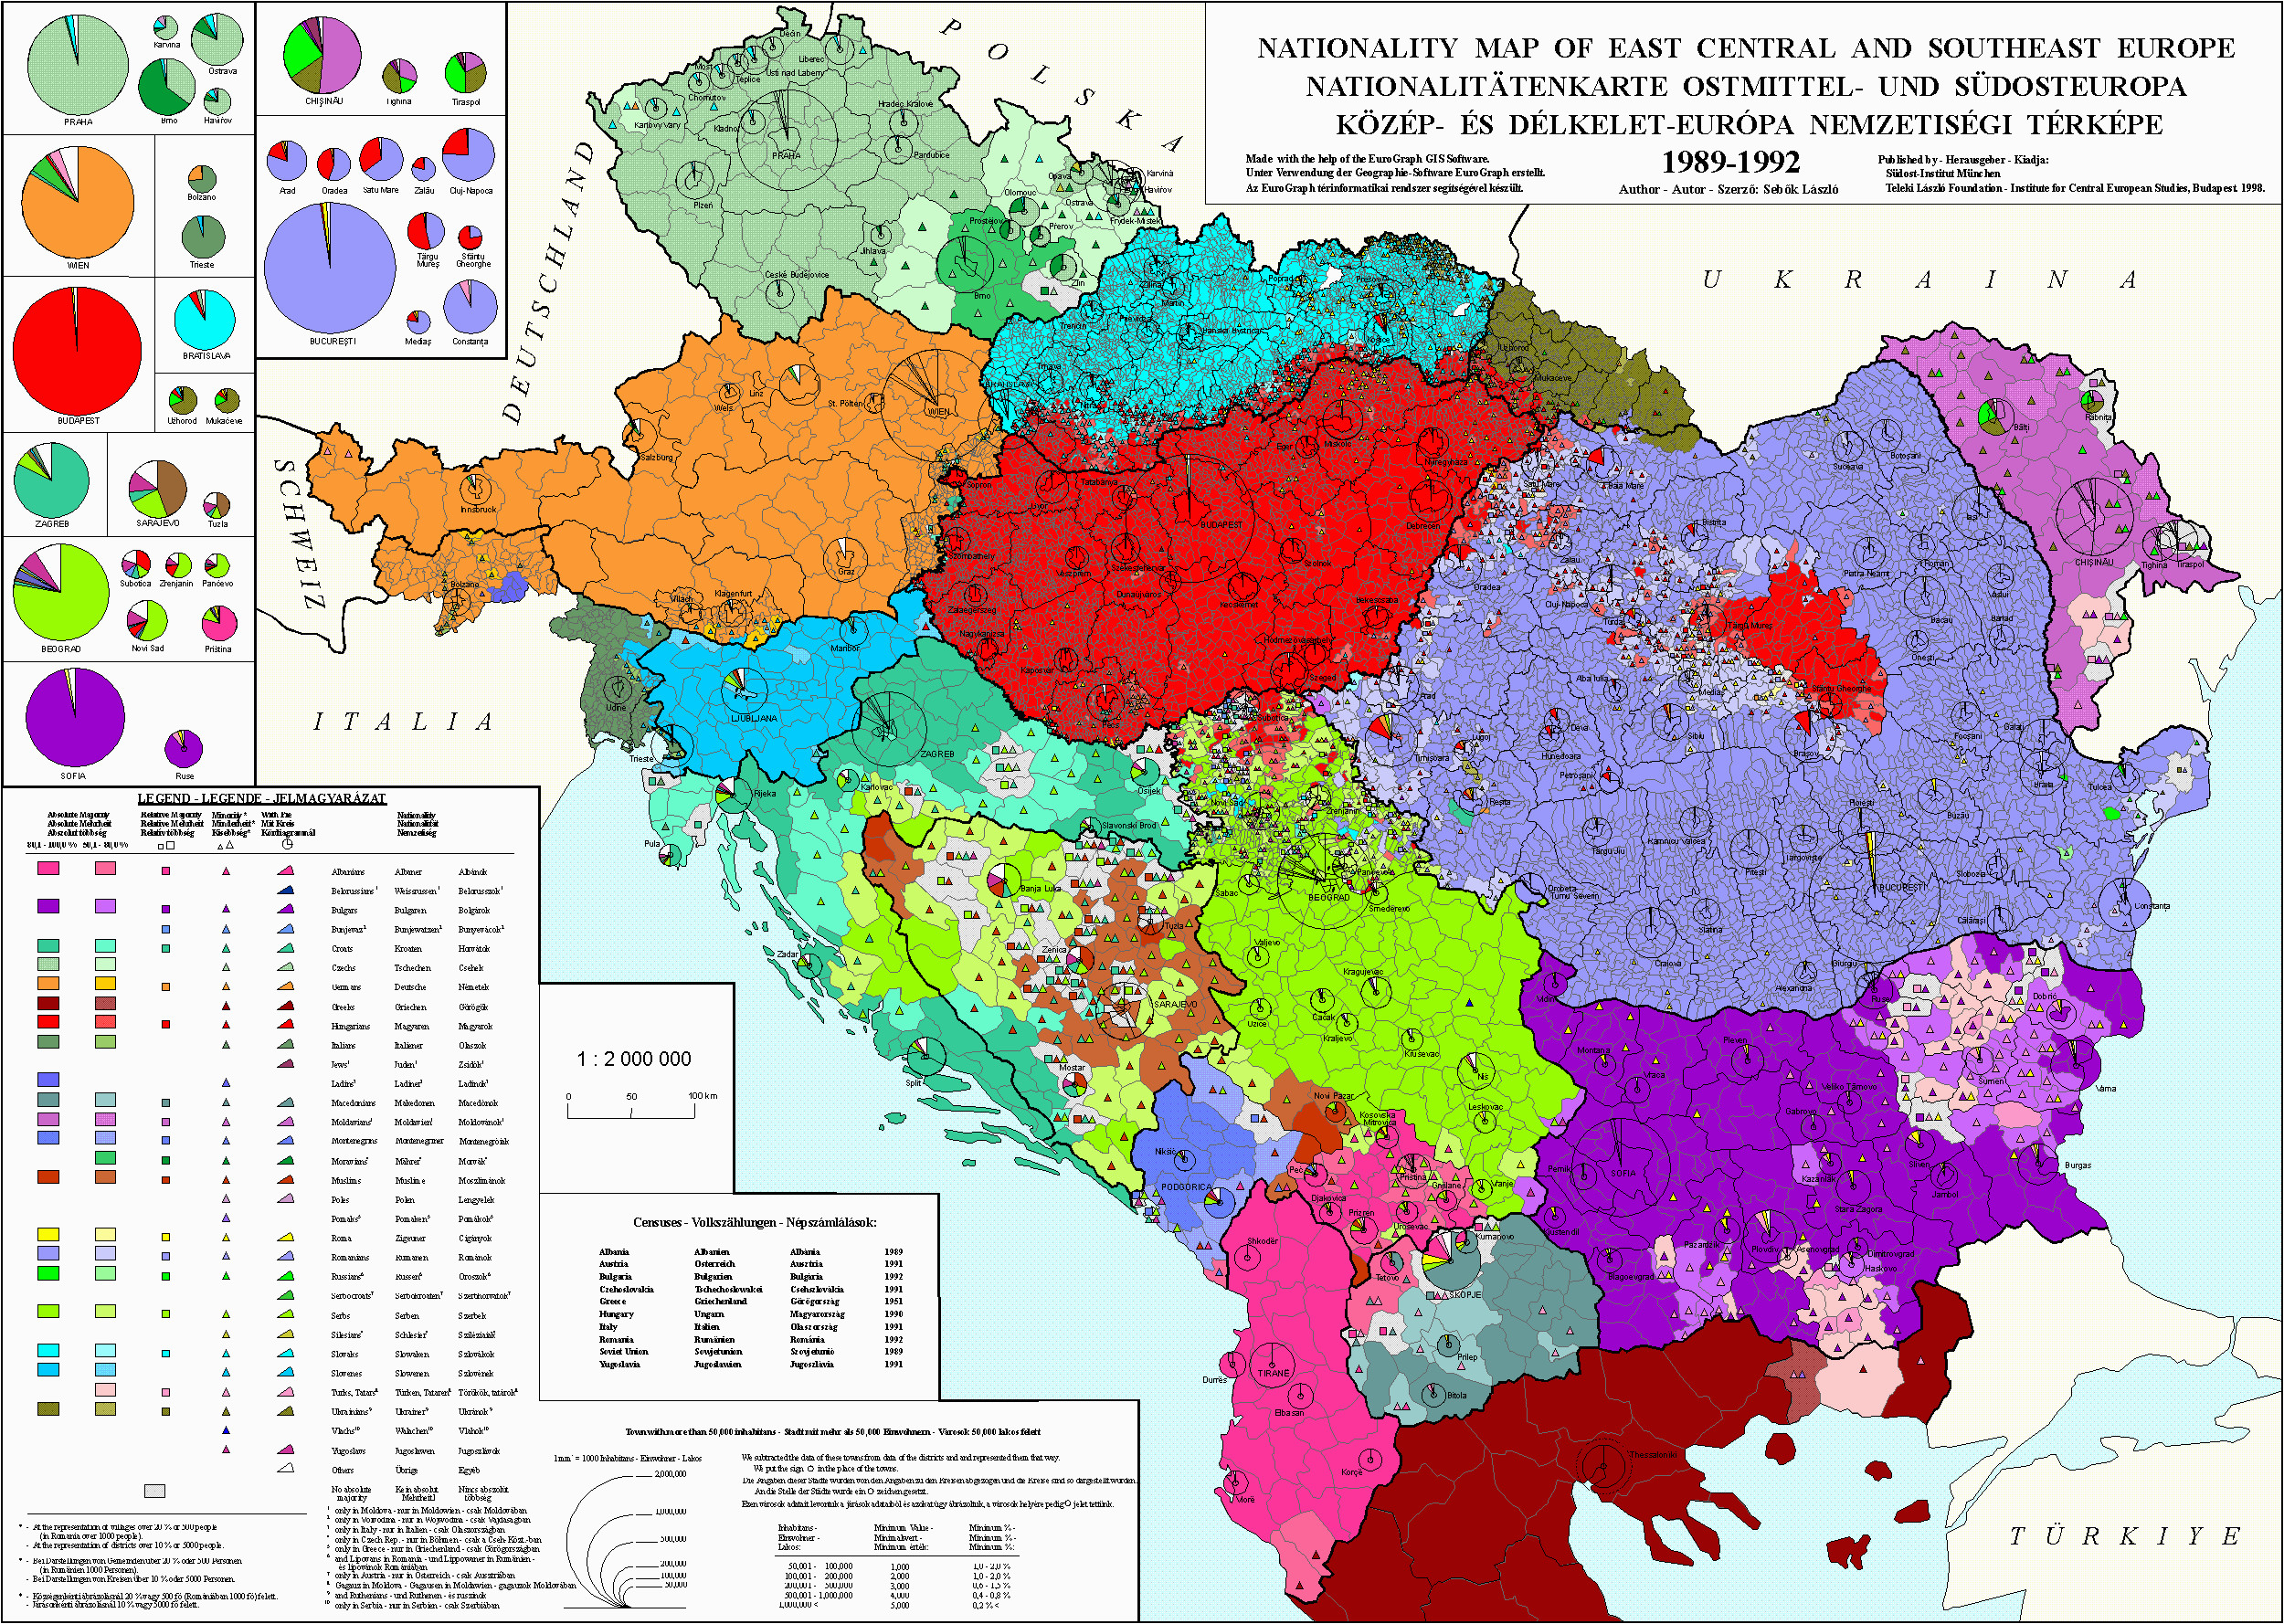 nationalities in east central and southeast europe 2500